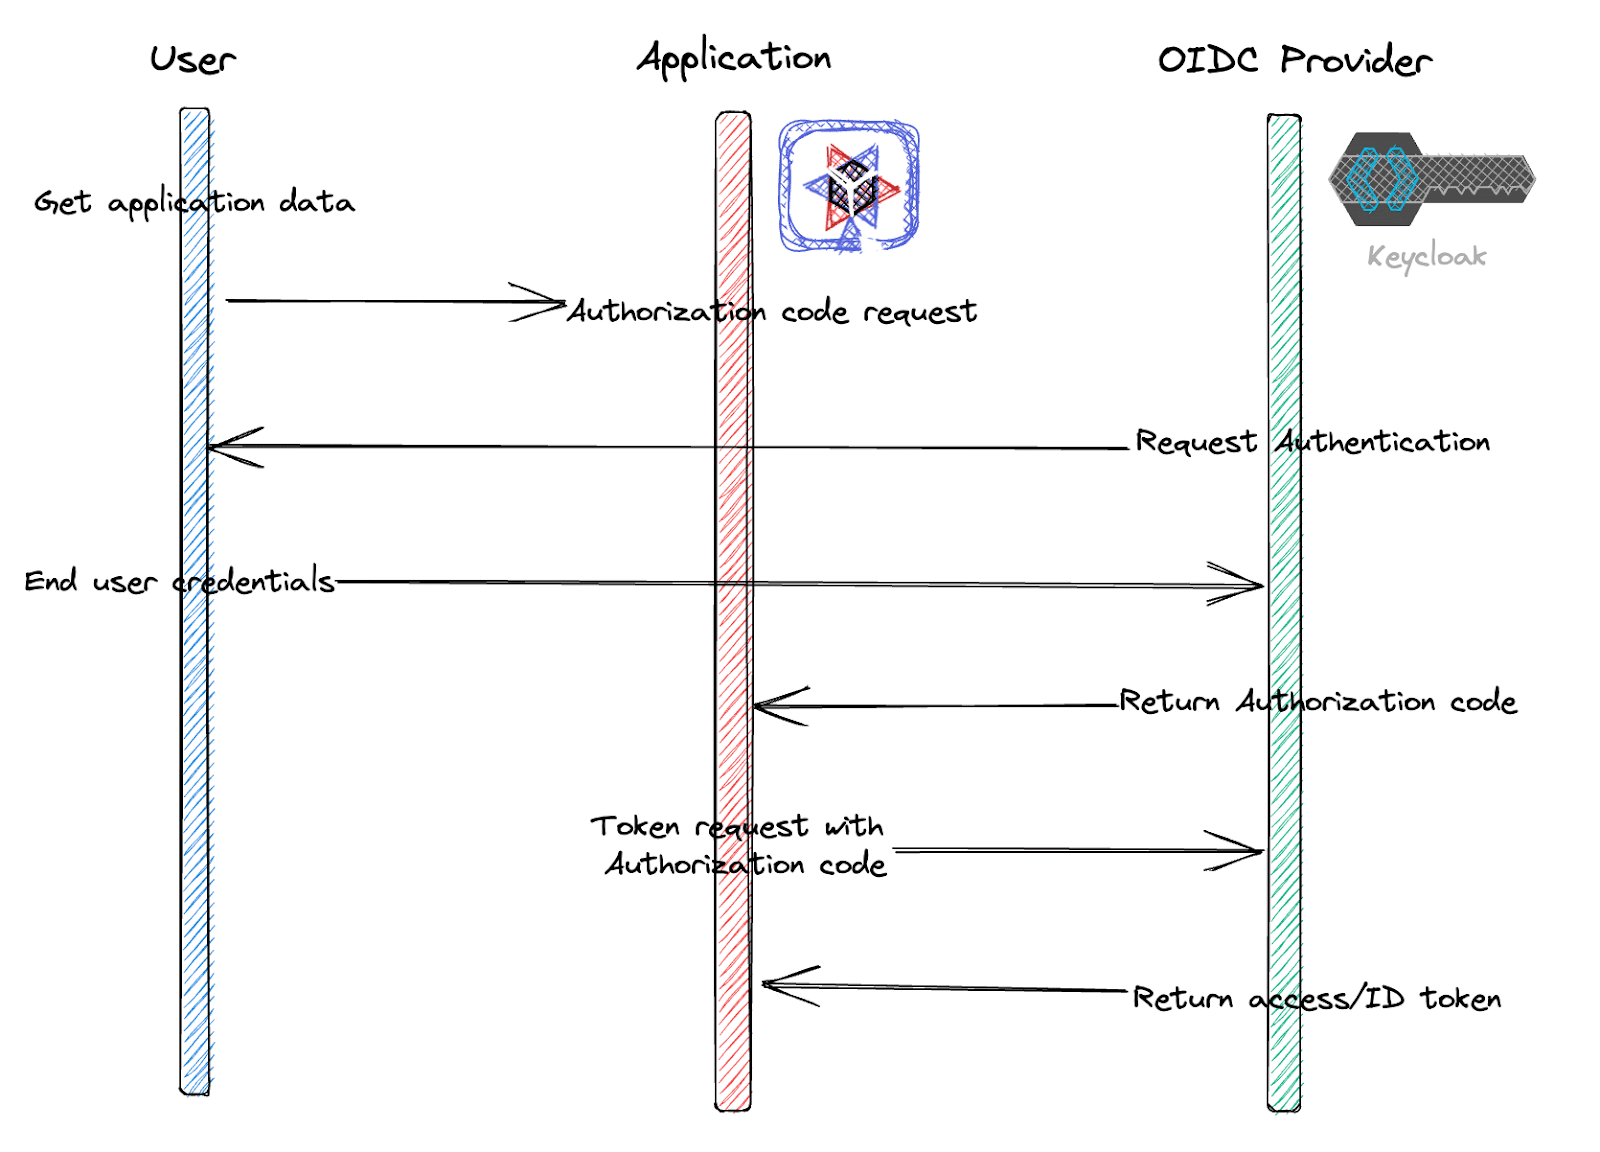 Figure 1. OpenID Connect authorization code flow